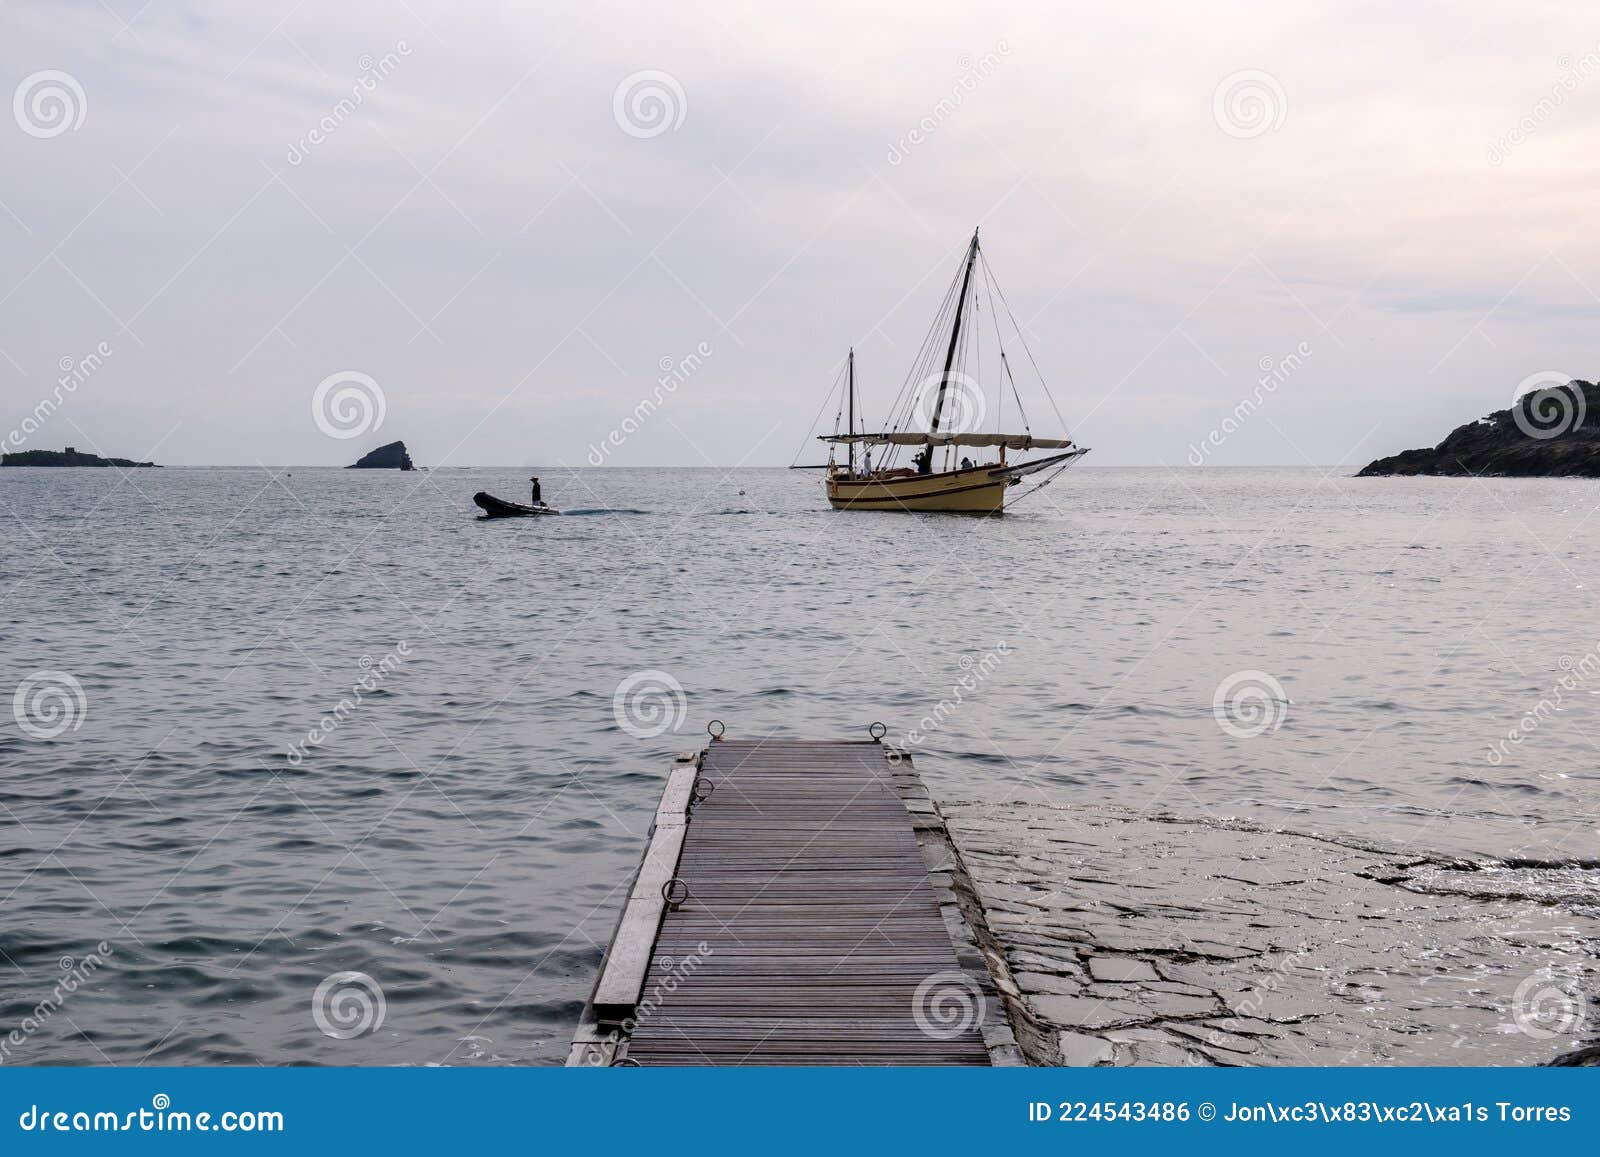 sailing boat at sea with horizon line in the background